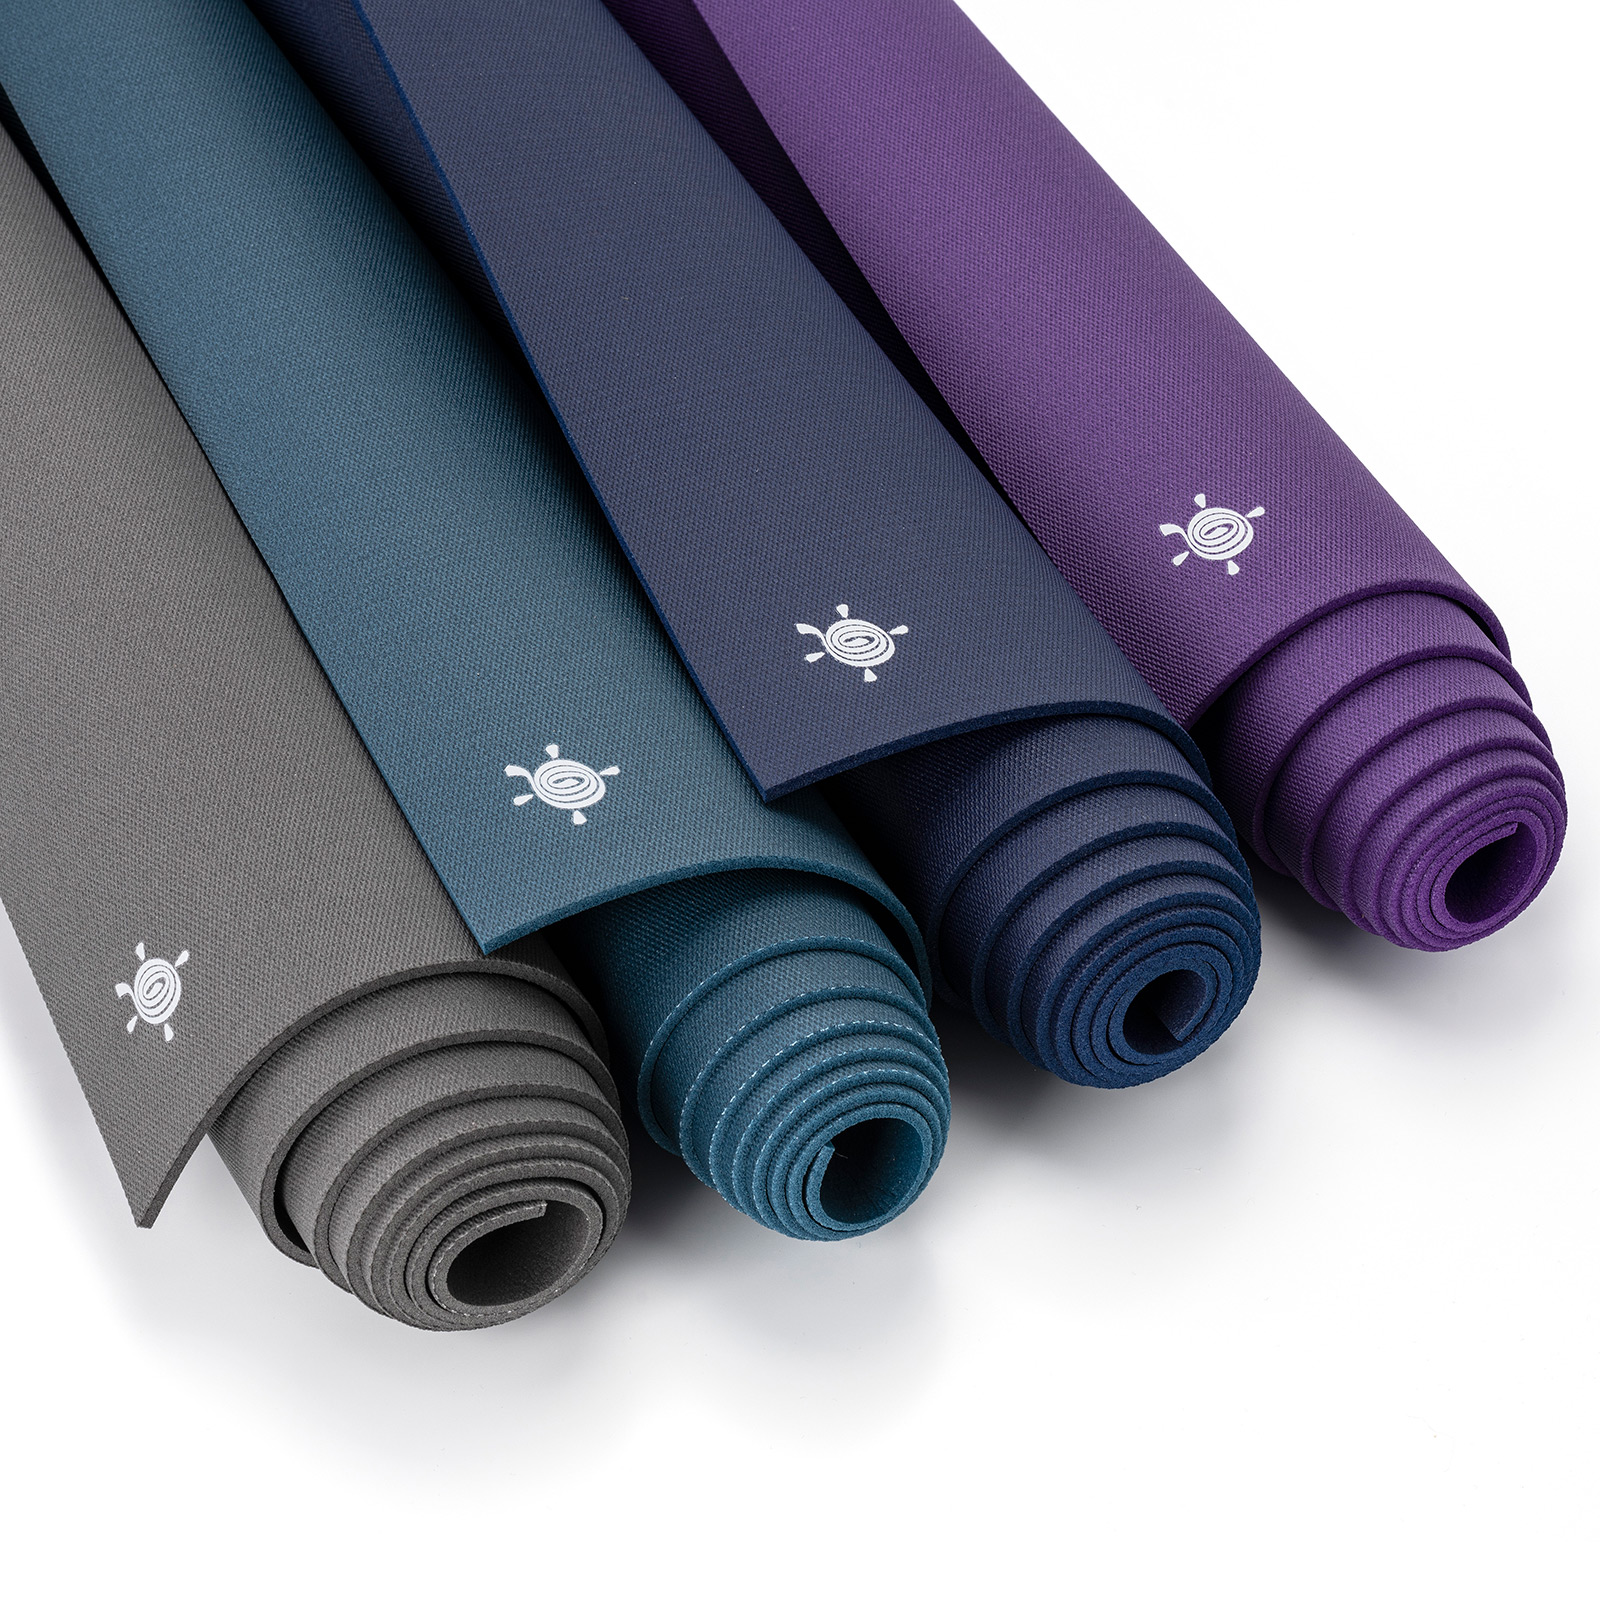 are all yoga mats the same